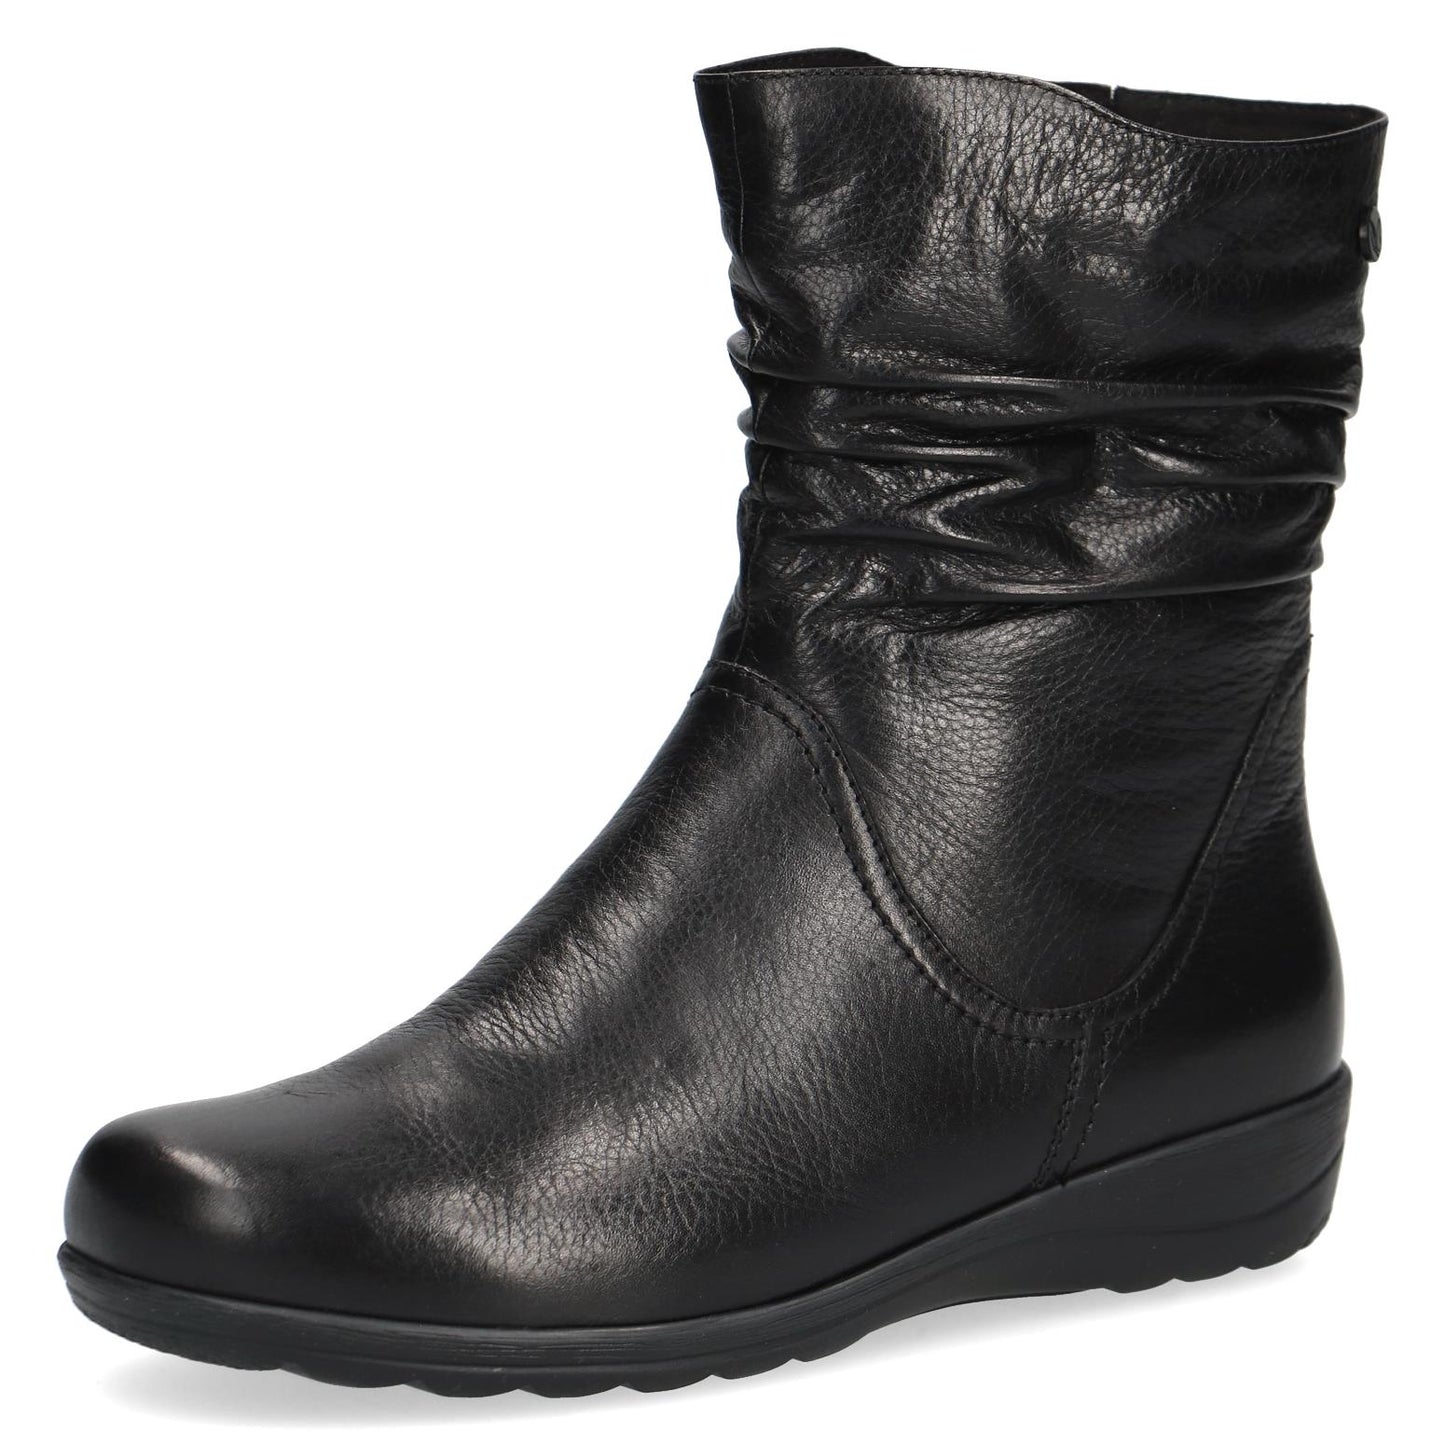 Caprice Vera 26406-29 Womens Ankle Boots